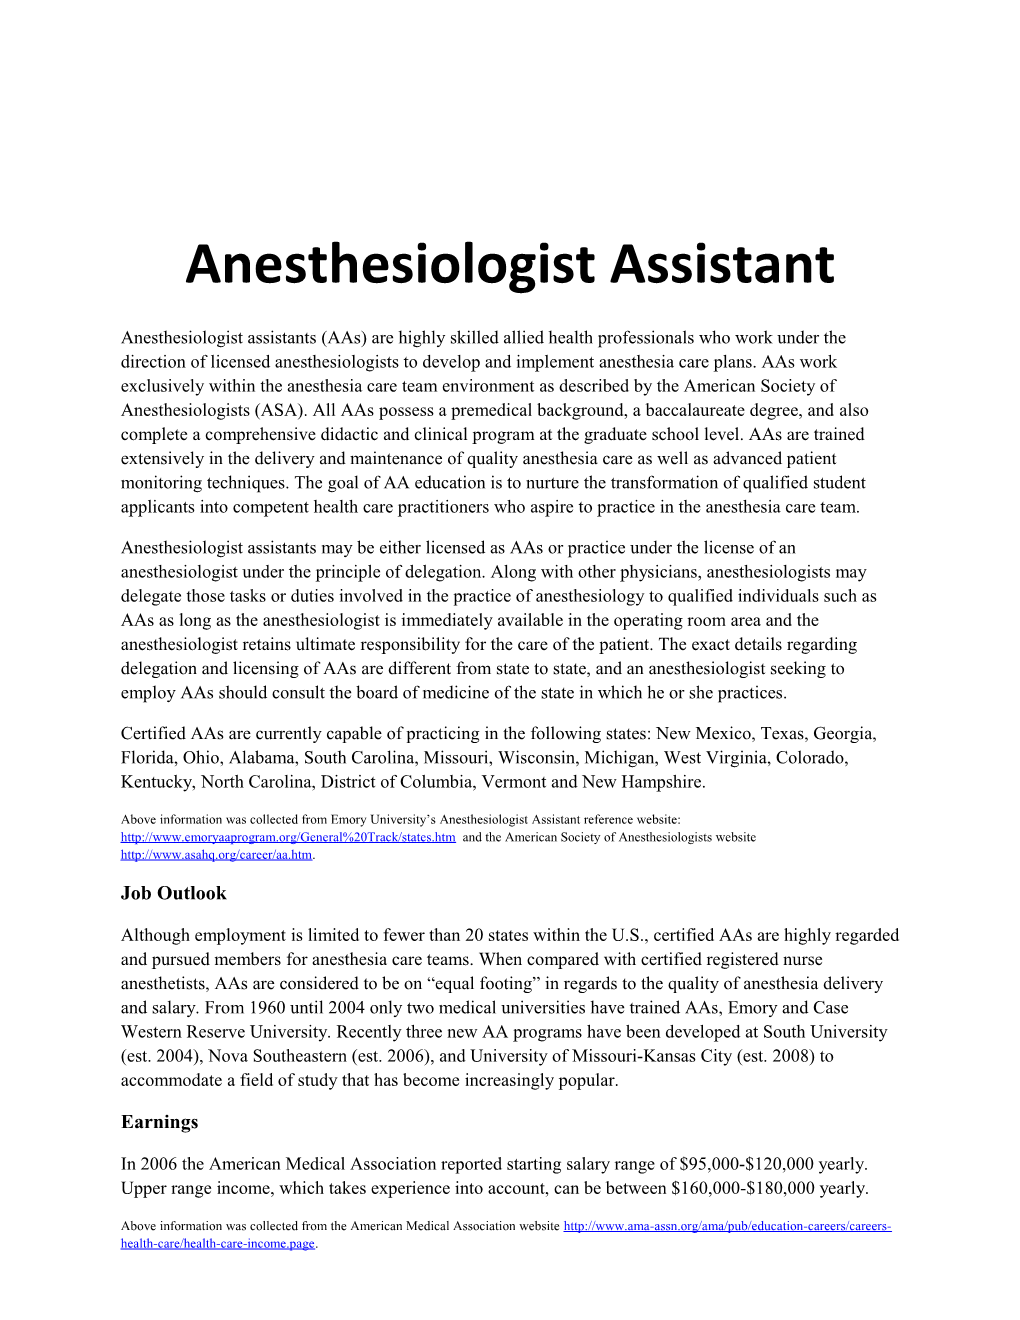 Anesthesiologist Assistant